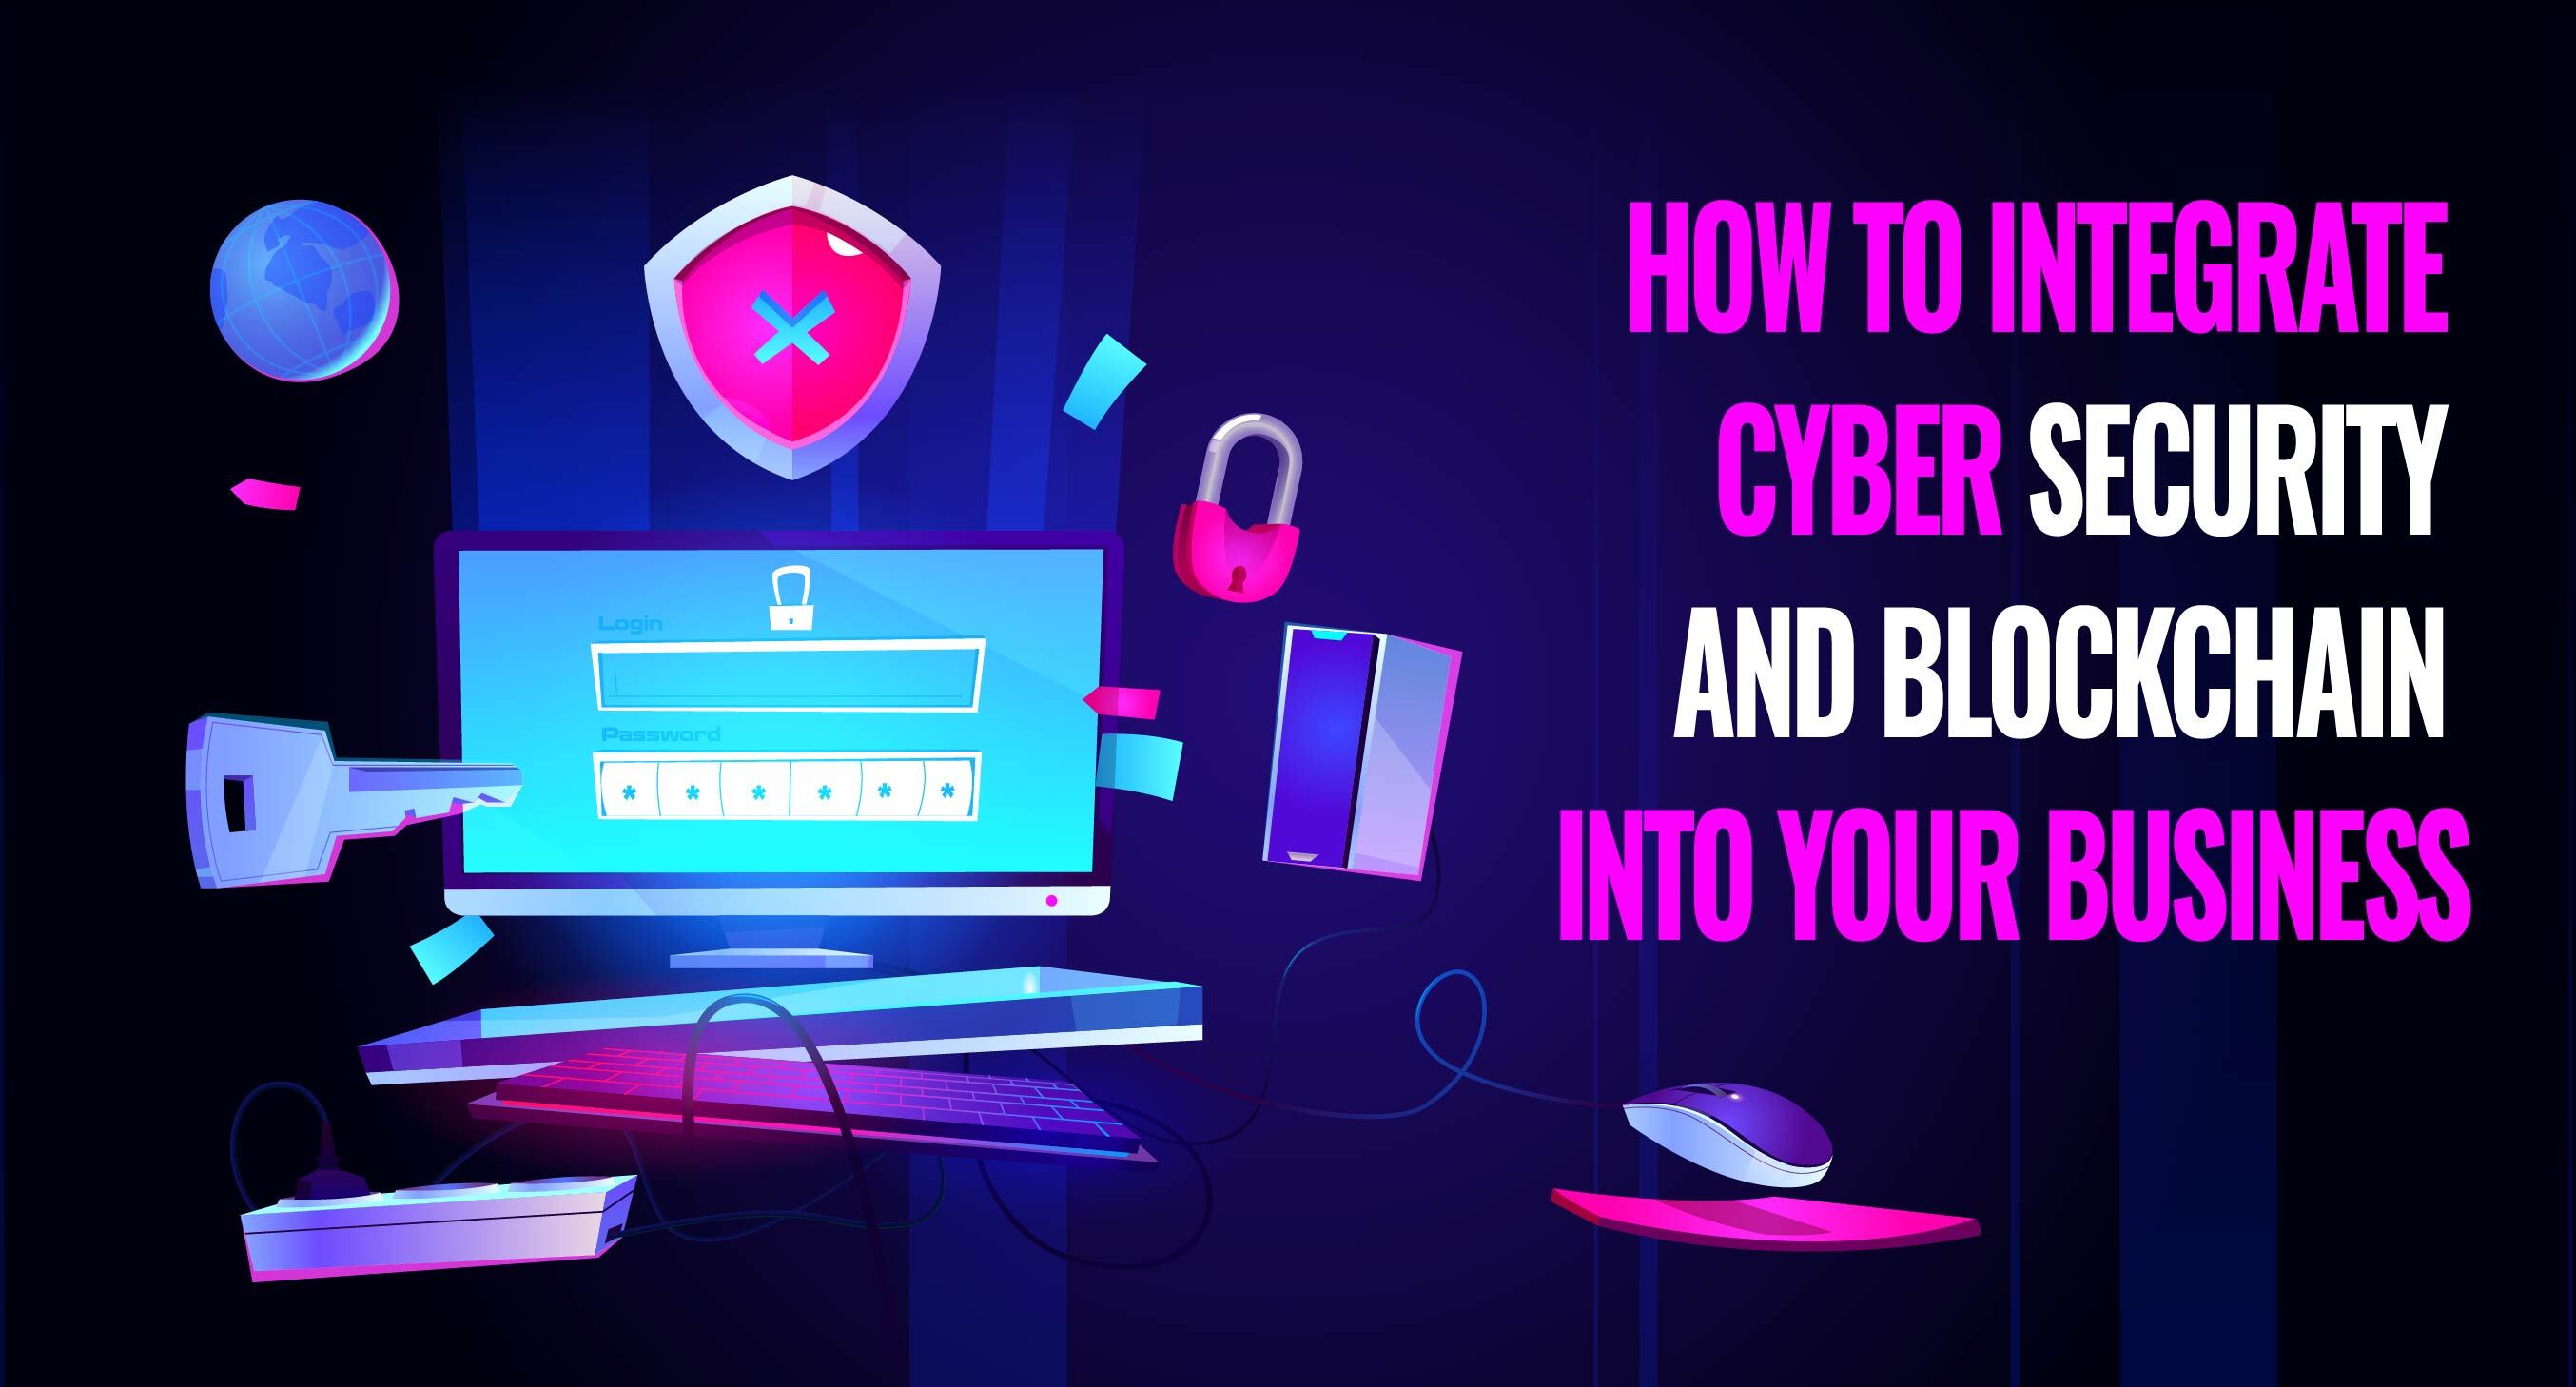 How to Integrate Cyber Security and Blockchain into Your Business